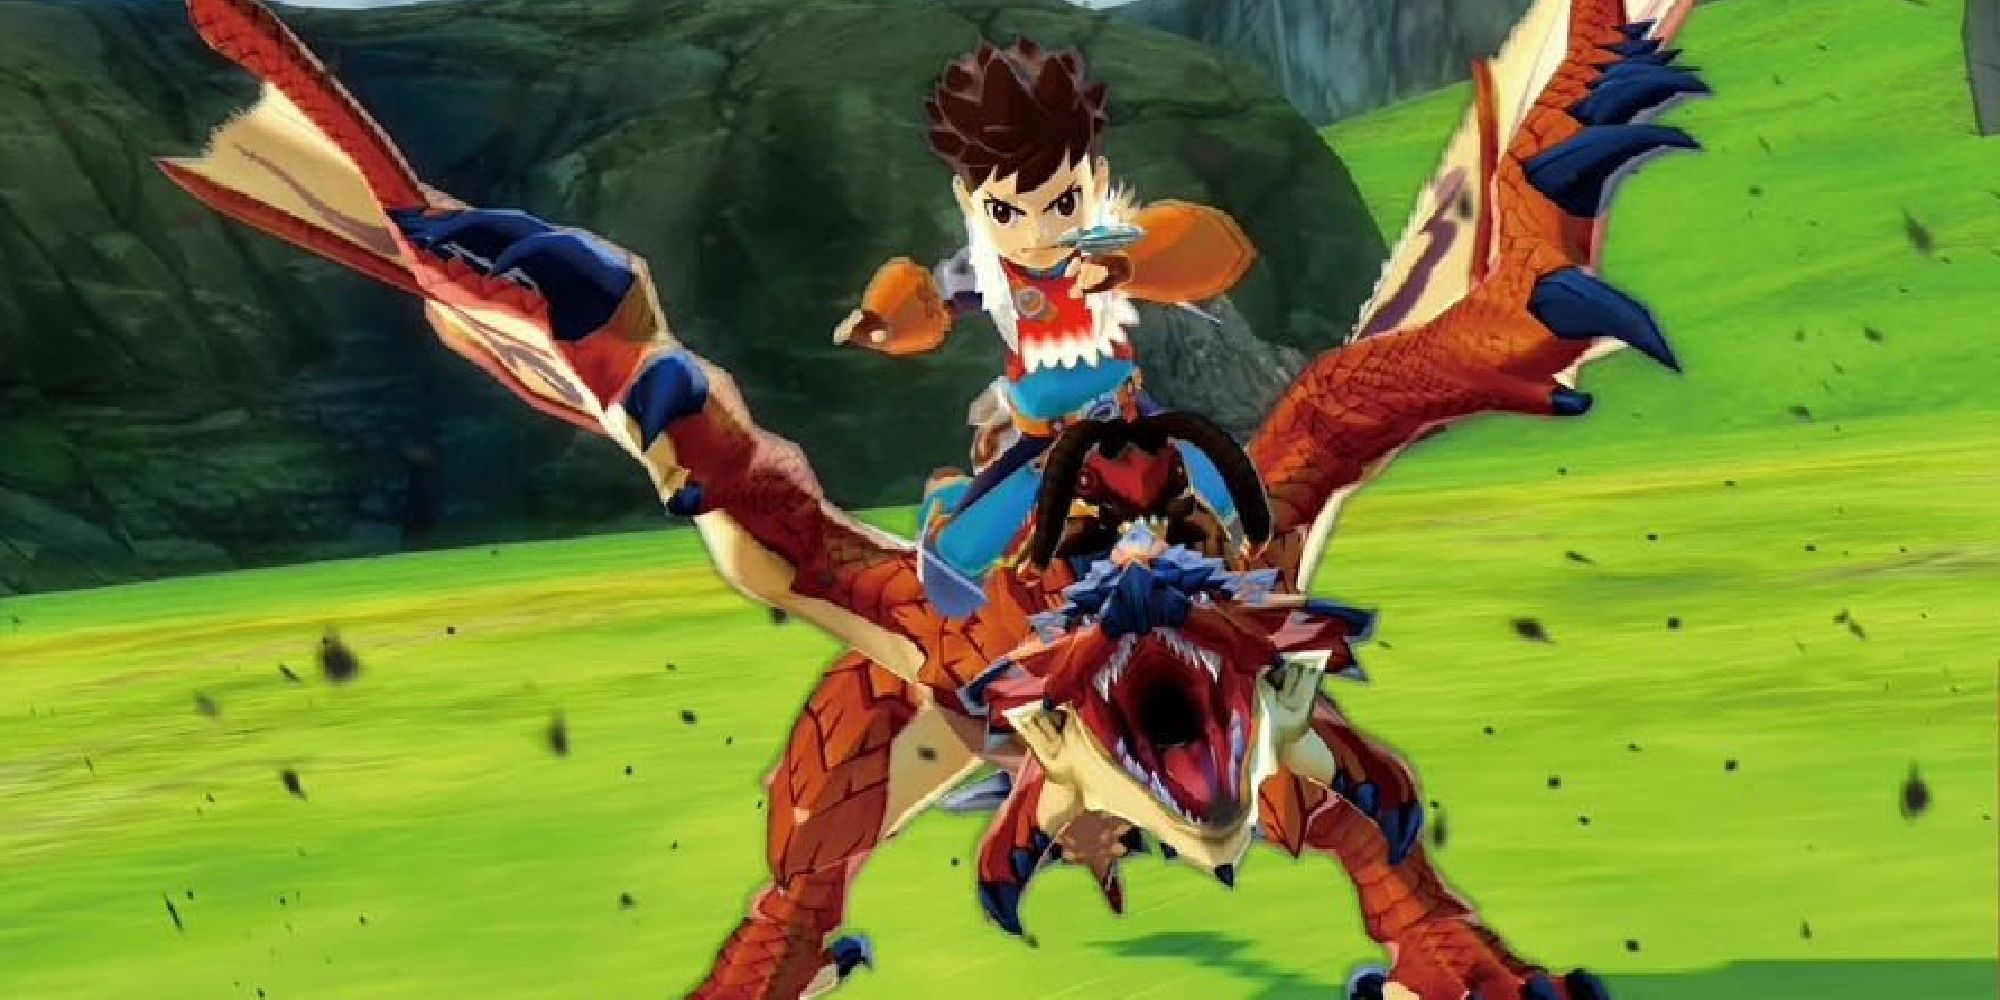 A Rider on the back of a roaring Rathalos in Monster Hunter Stories